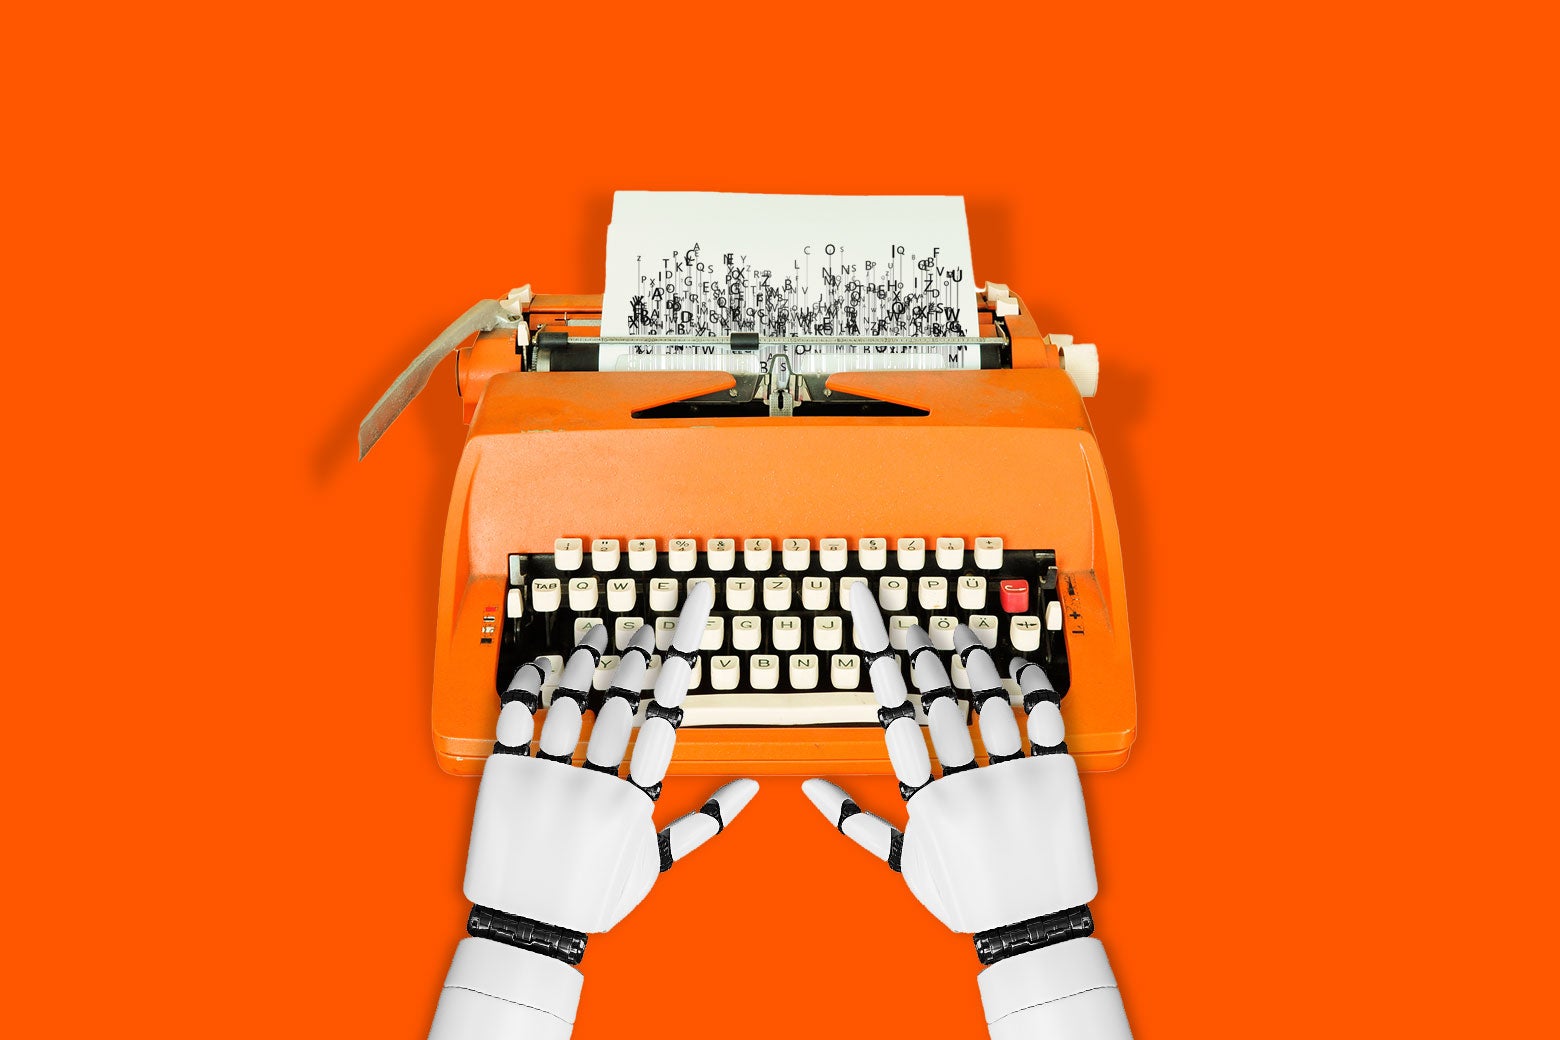 Robot hands are shown typing on an orange typewriter with flowers emerging on the paper. 